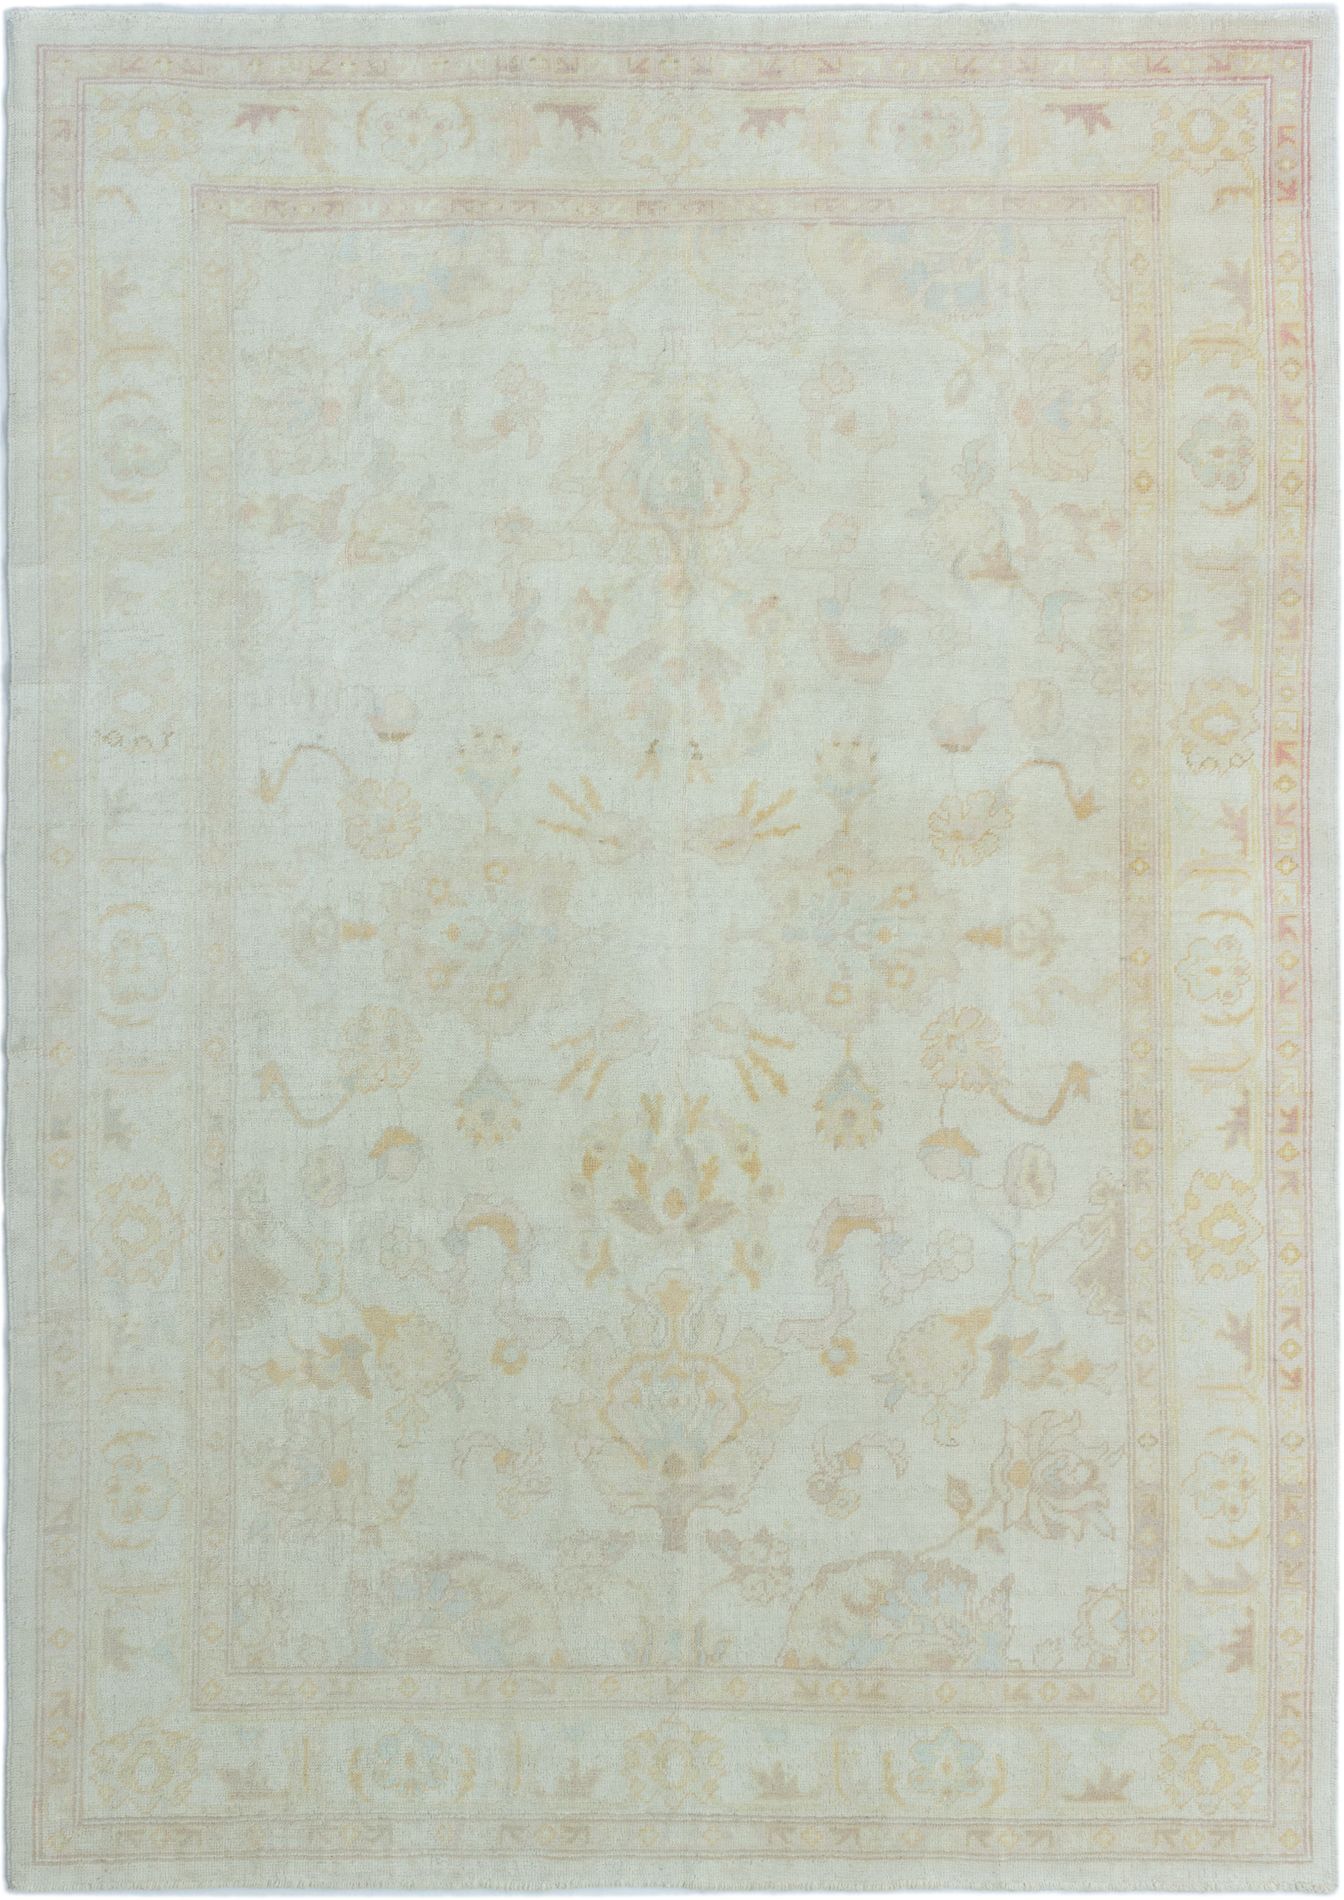 Hand-knotted Authentic Ushak Cream Wool Rug 6'4" x 8'10" Size: 6'4" x 8'10"  